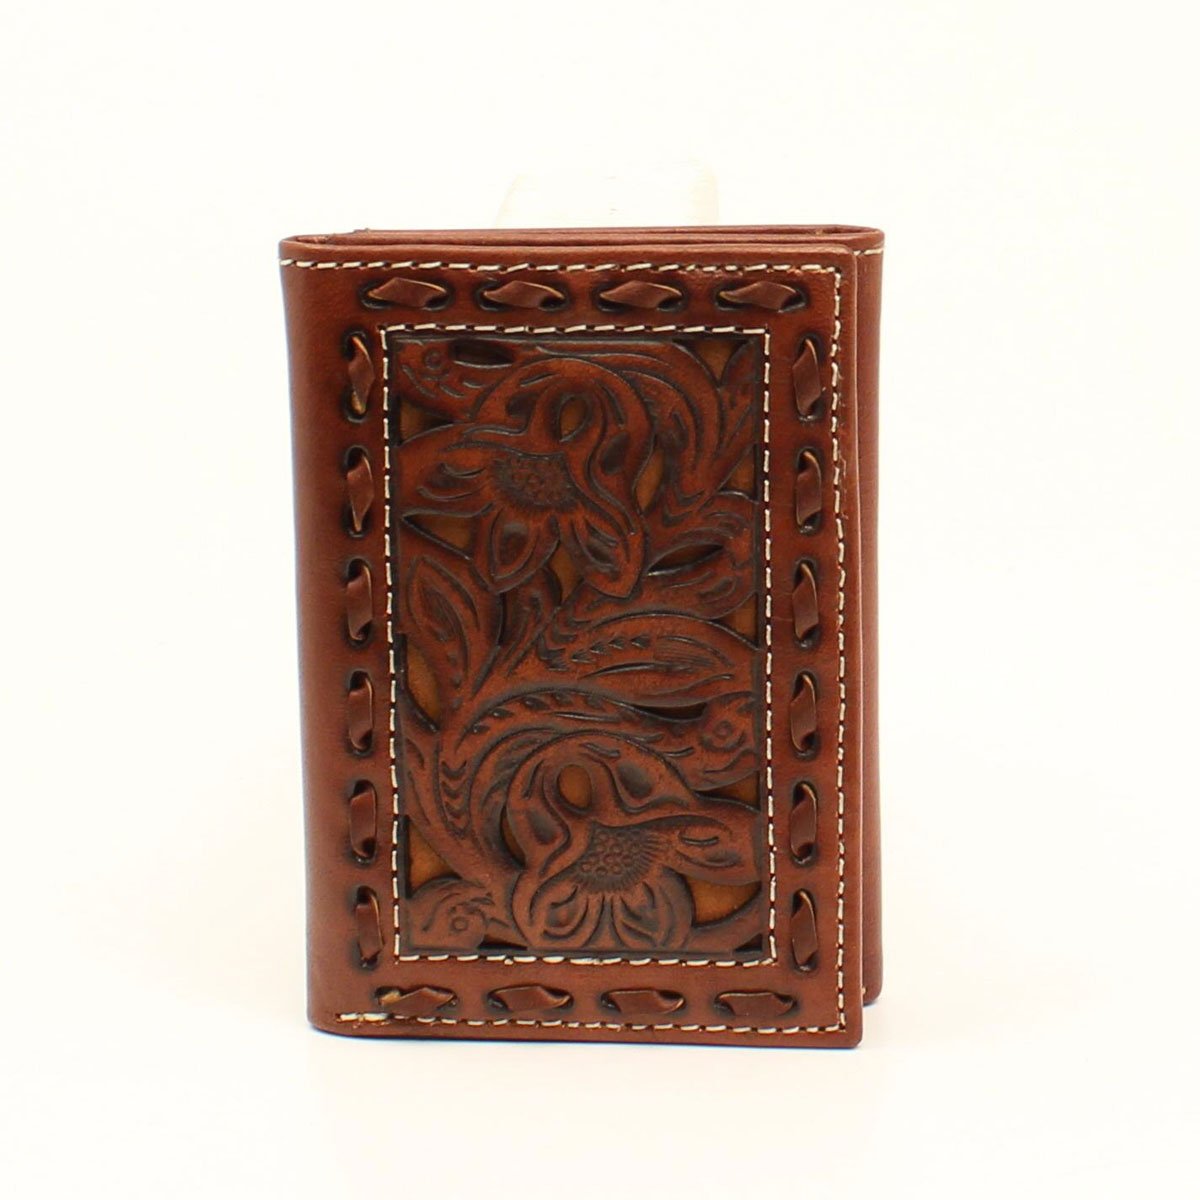 N500002208 Nocona Leather Goods TRIFOLD WALLET Floral Pierced Wallet